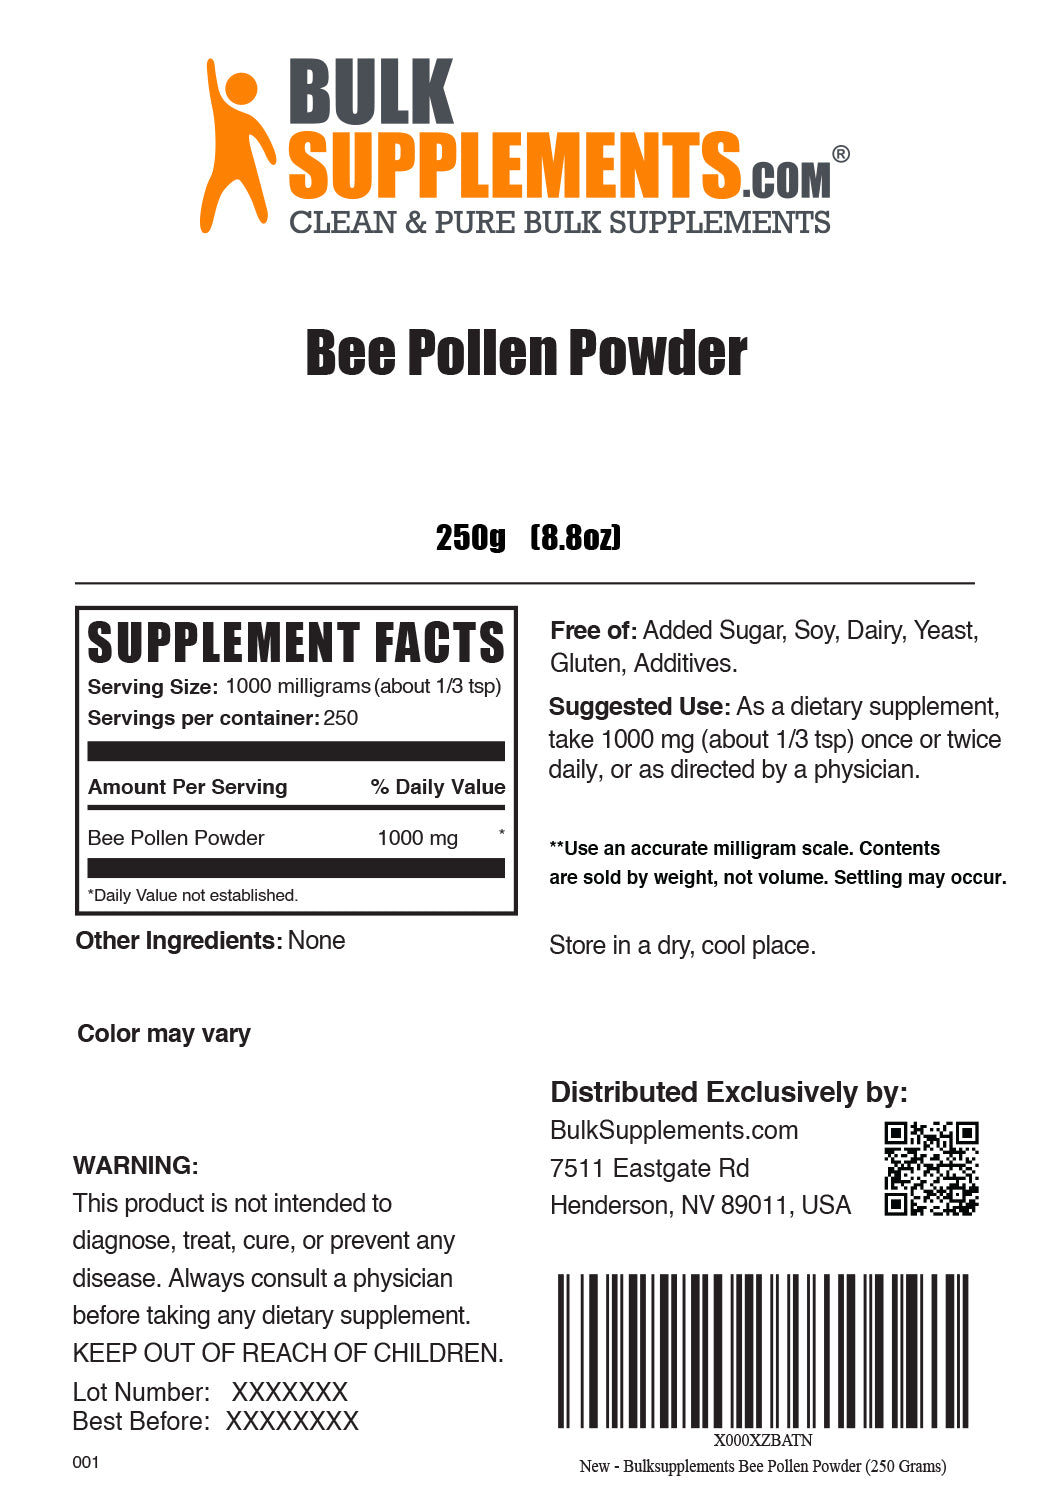 Bee Pollen Supplement Facts and Serving Size for 250g bag